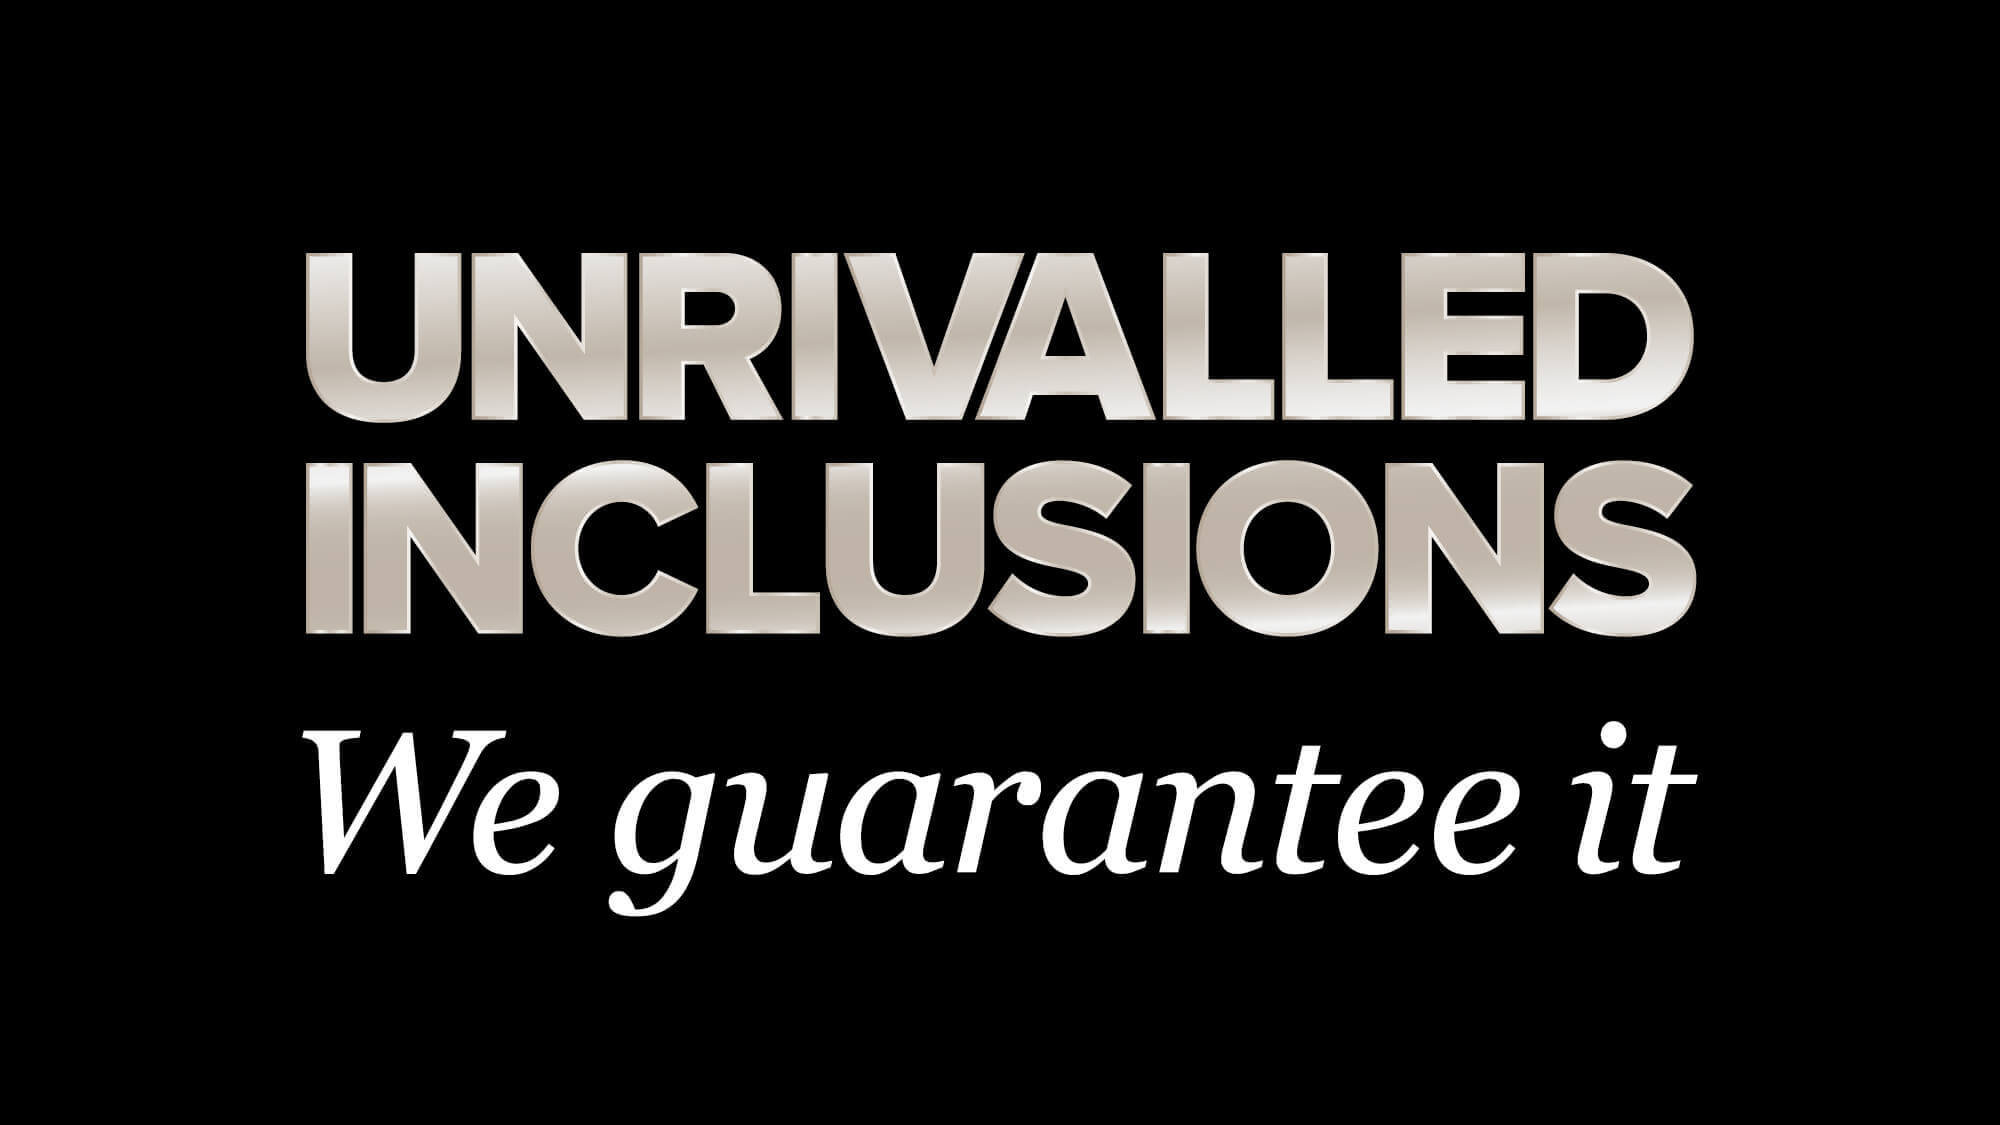 Unrivalled inclusions - we guarantee it